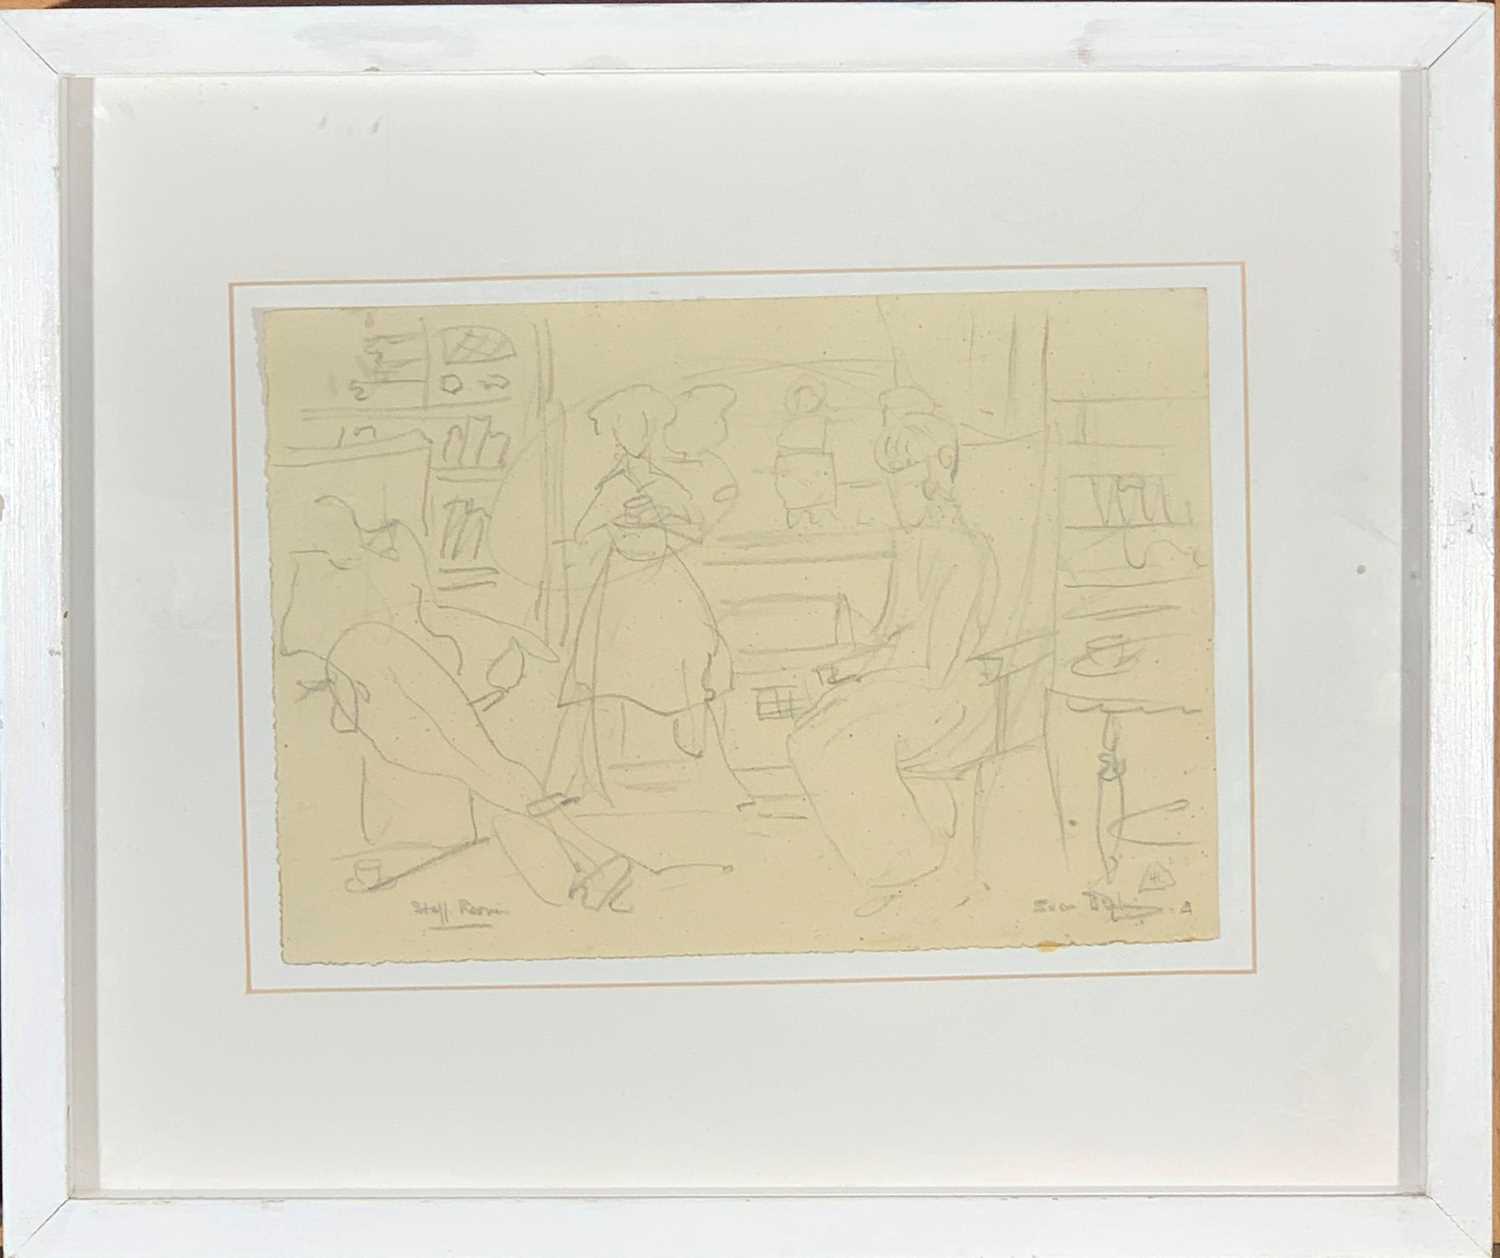 Sven BERLIN (1911 - 1999)Staff Room DrawingPencilSigned and inscribedPaper size 19 x 27.5cmCondition - Image 2 of 2